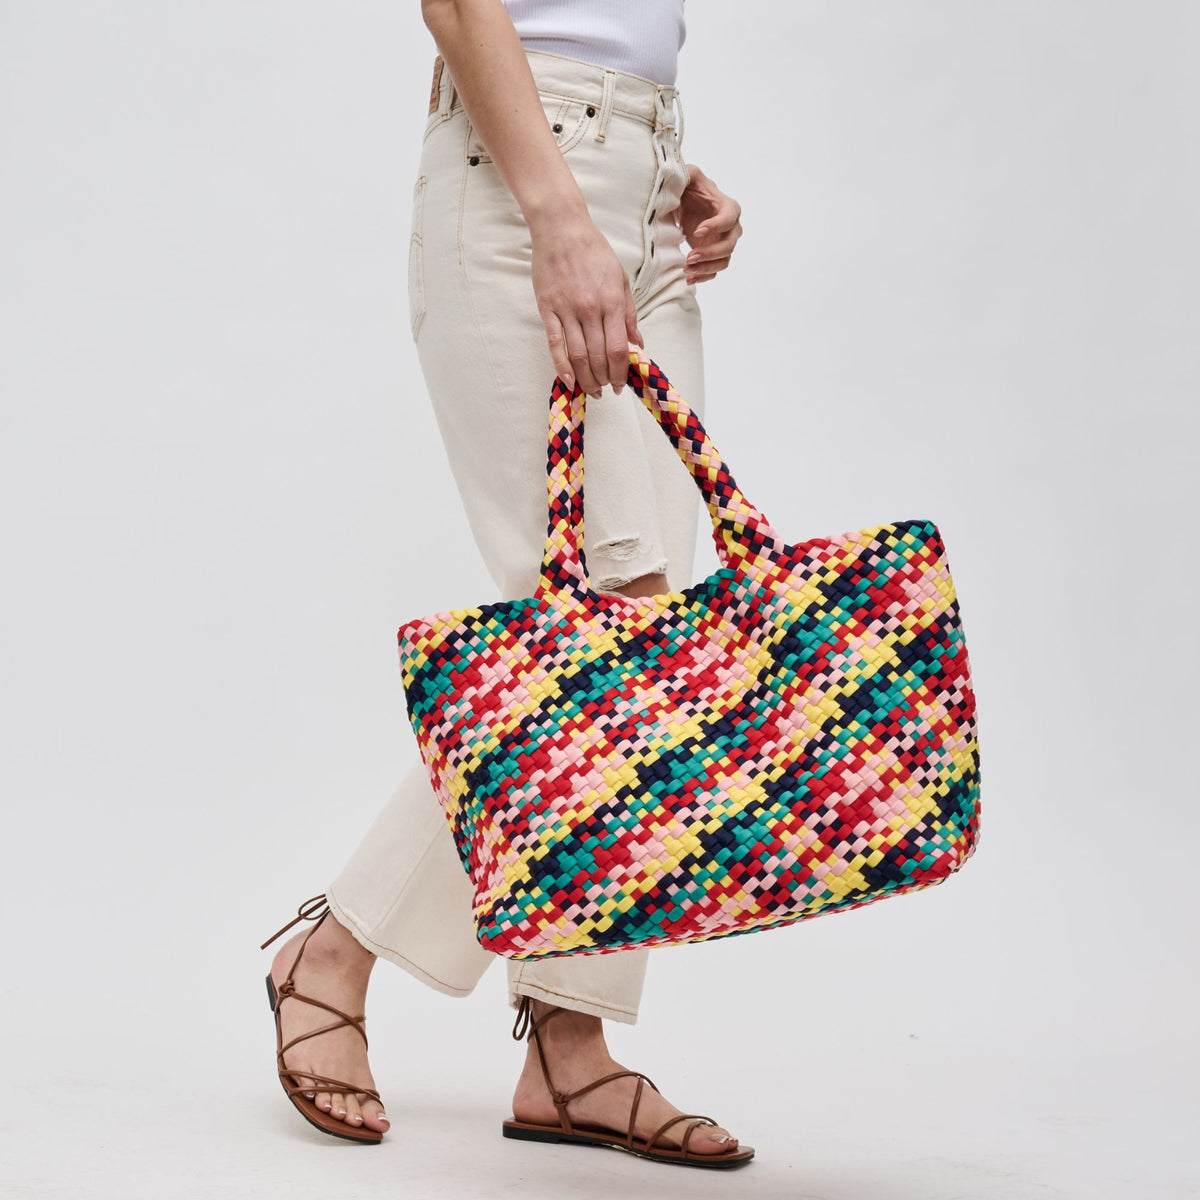 Woman wearing Candy Sol and Selene Sky's The Limit - Large Tote 841764109321 View 2 | Candy